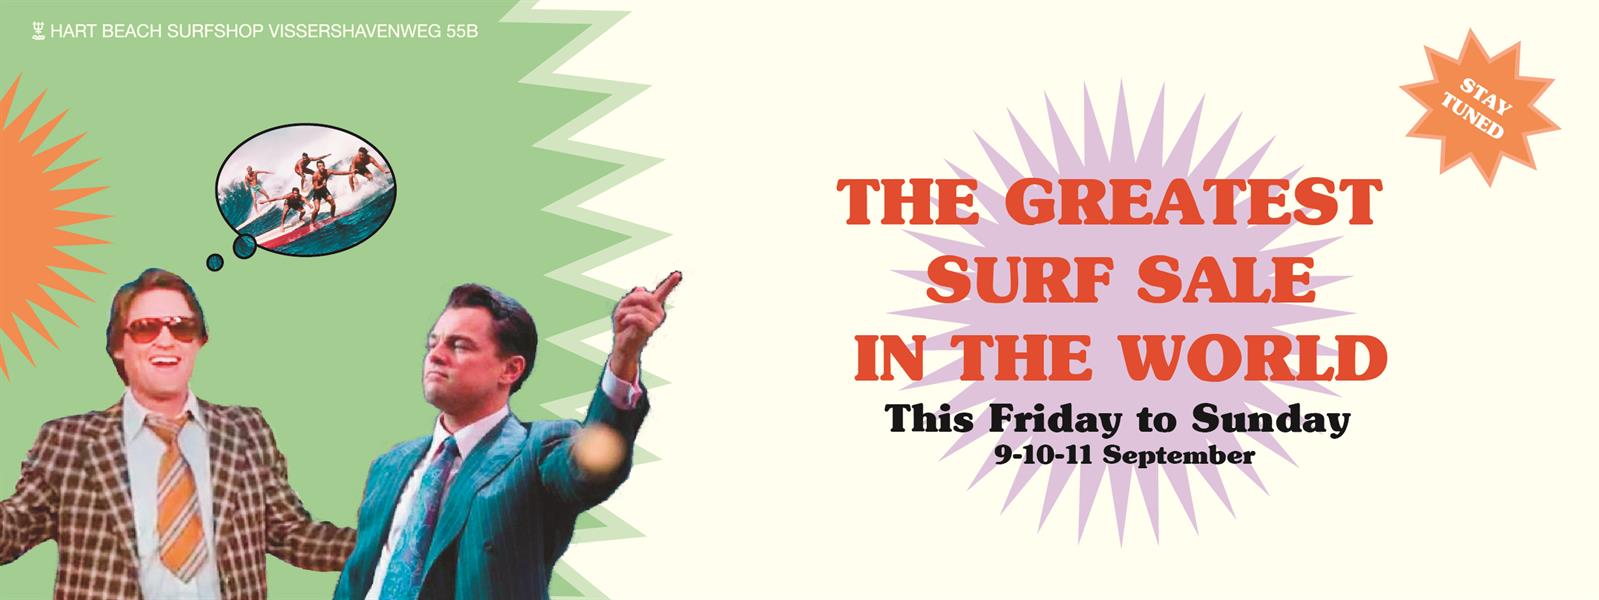 The greatest surfsale in the world